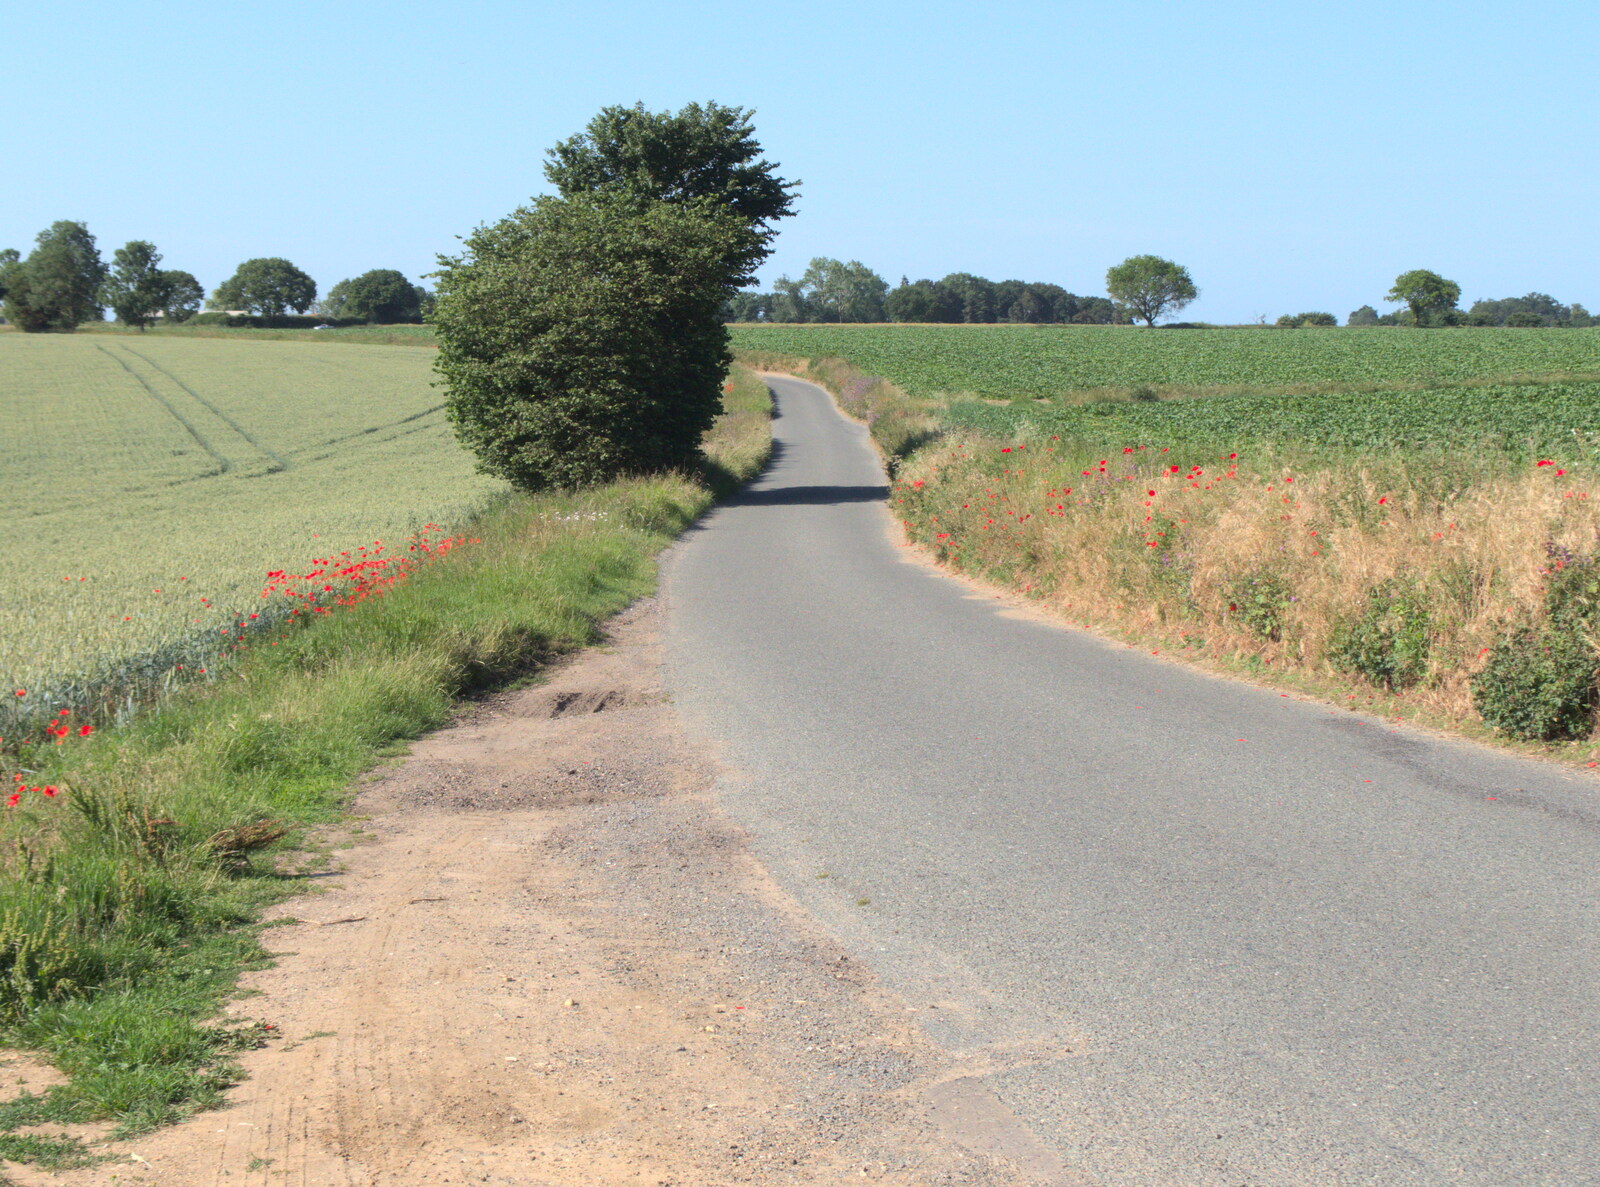 The back road from Hoxne to Eye from Lockdown Bike Rides and an Anniversary Picnic, Mellis and Brome, Suffolk - 3rd July 2020